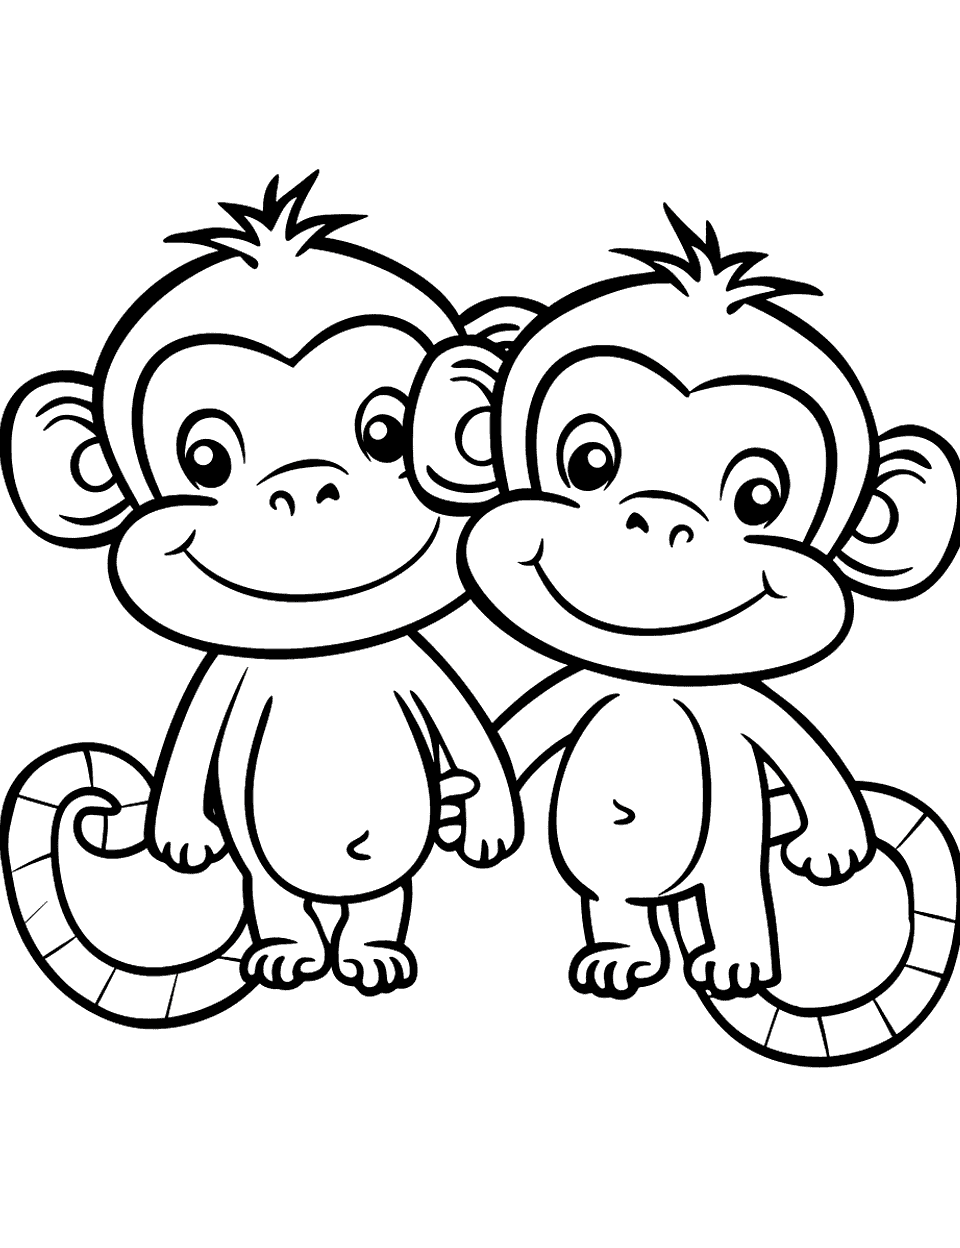 Kawaii Monkey Friends Coloring Page - Two kawaii-style monkeys holding hands and wearing big smiles.